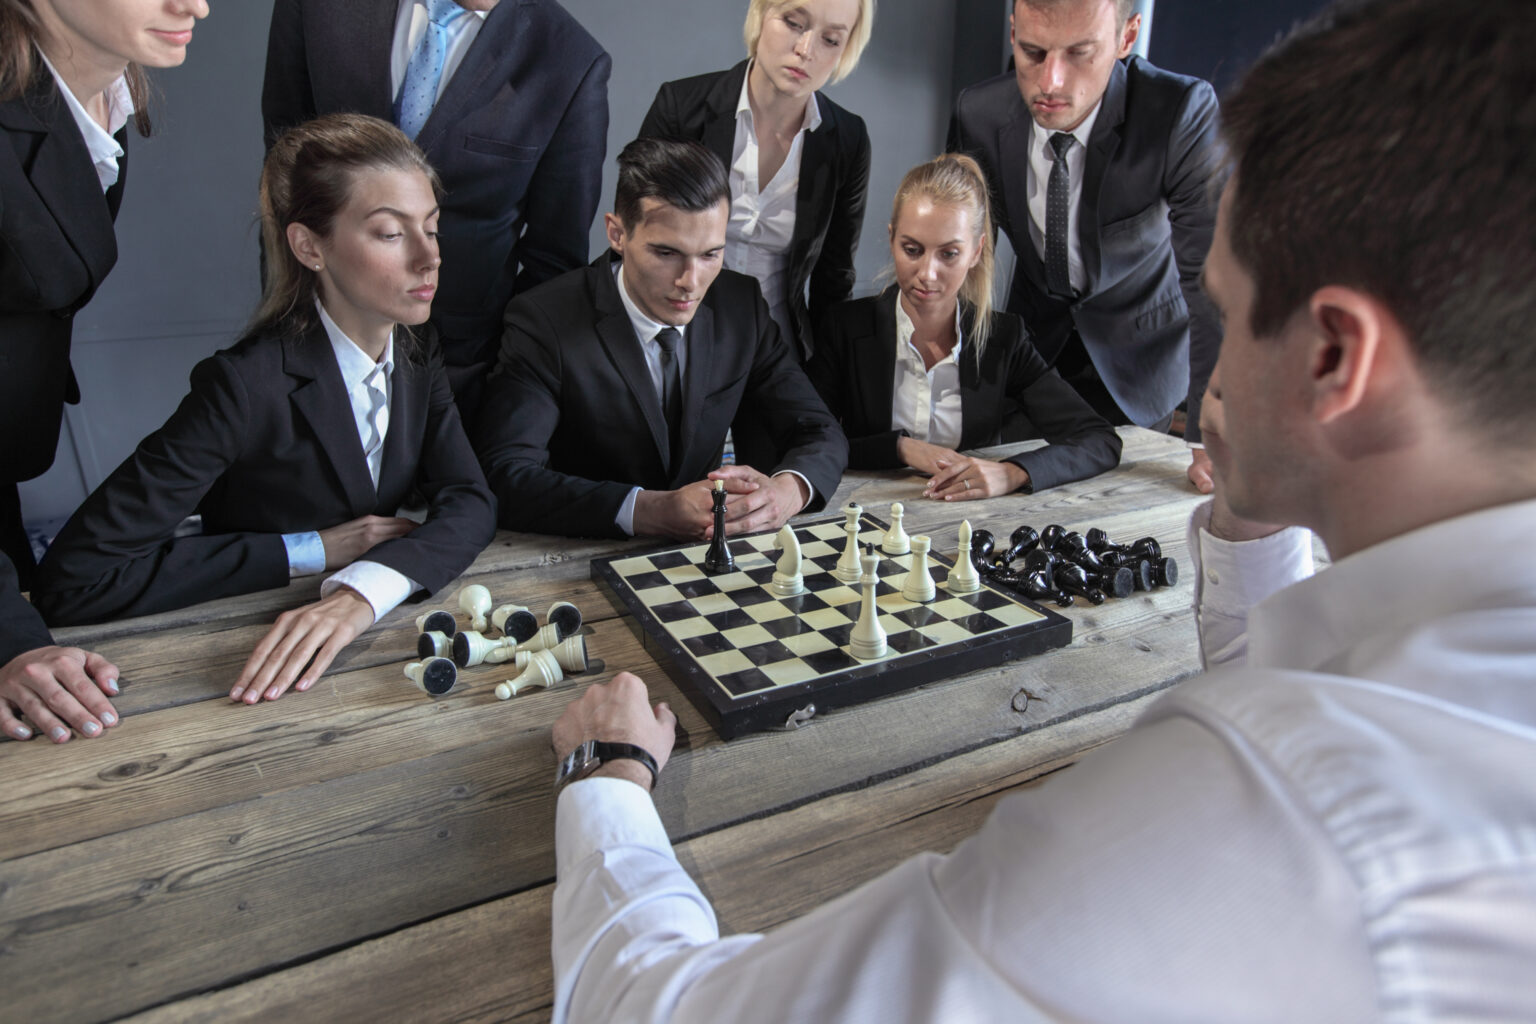 There are business people playing chess, team of workers losing, leader is winning, all that representing business intelligence matter, the fact to take decisions based on data and insights